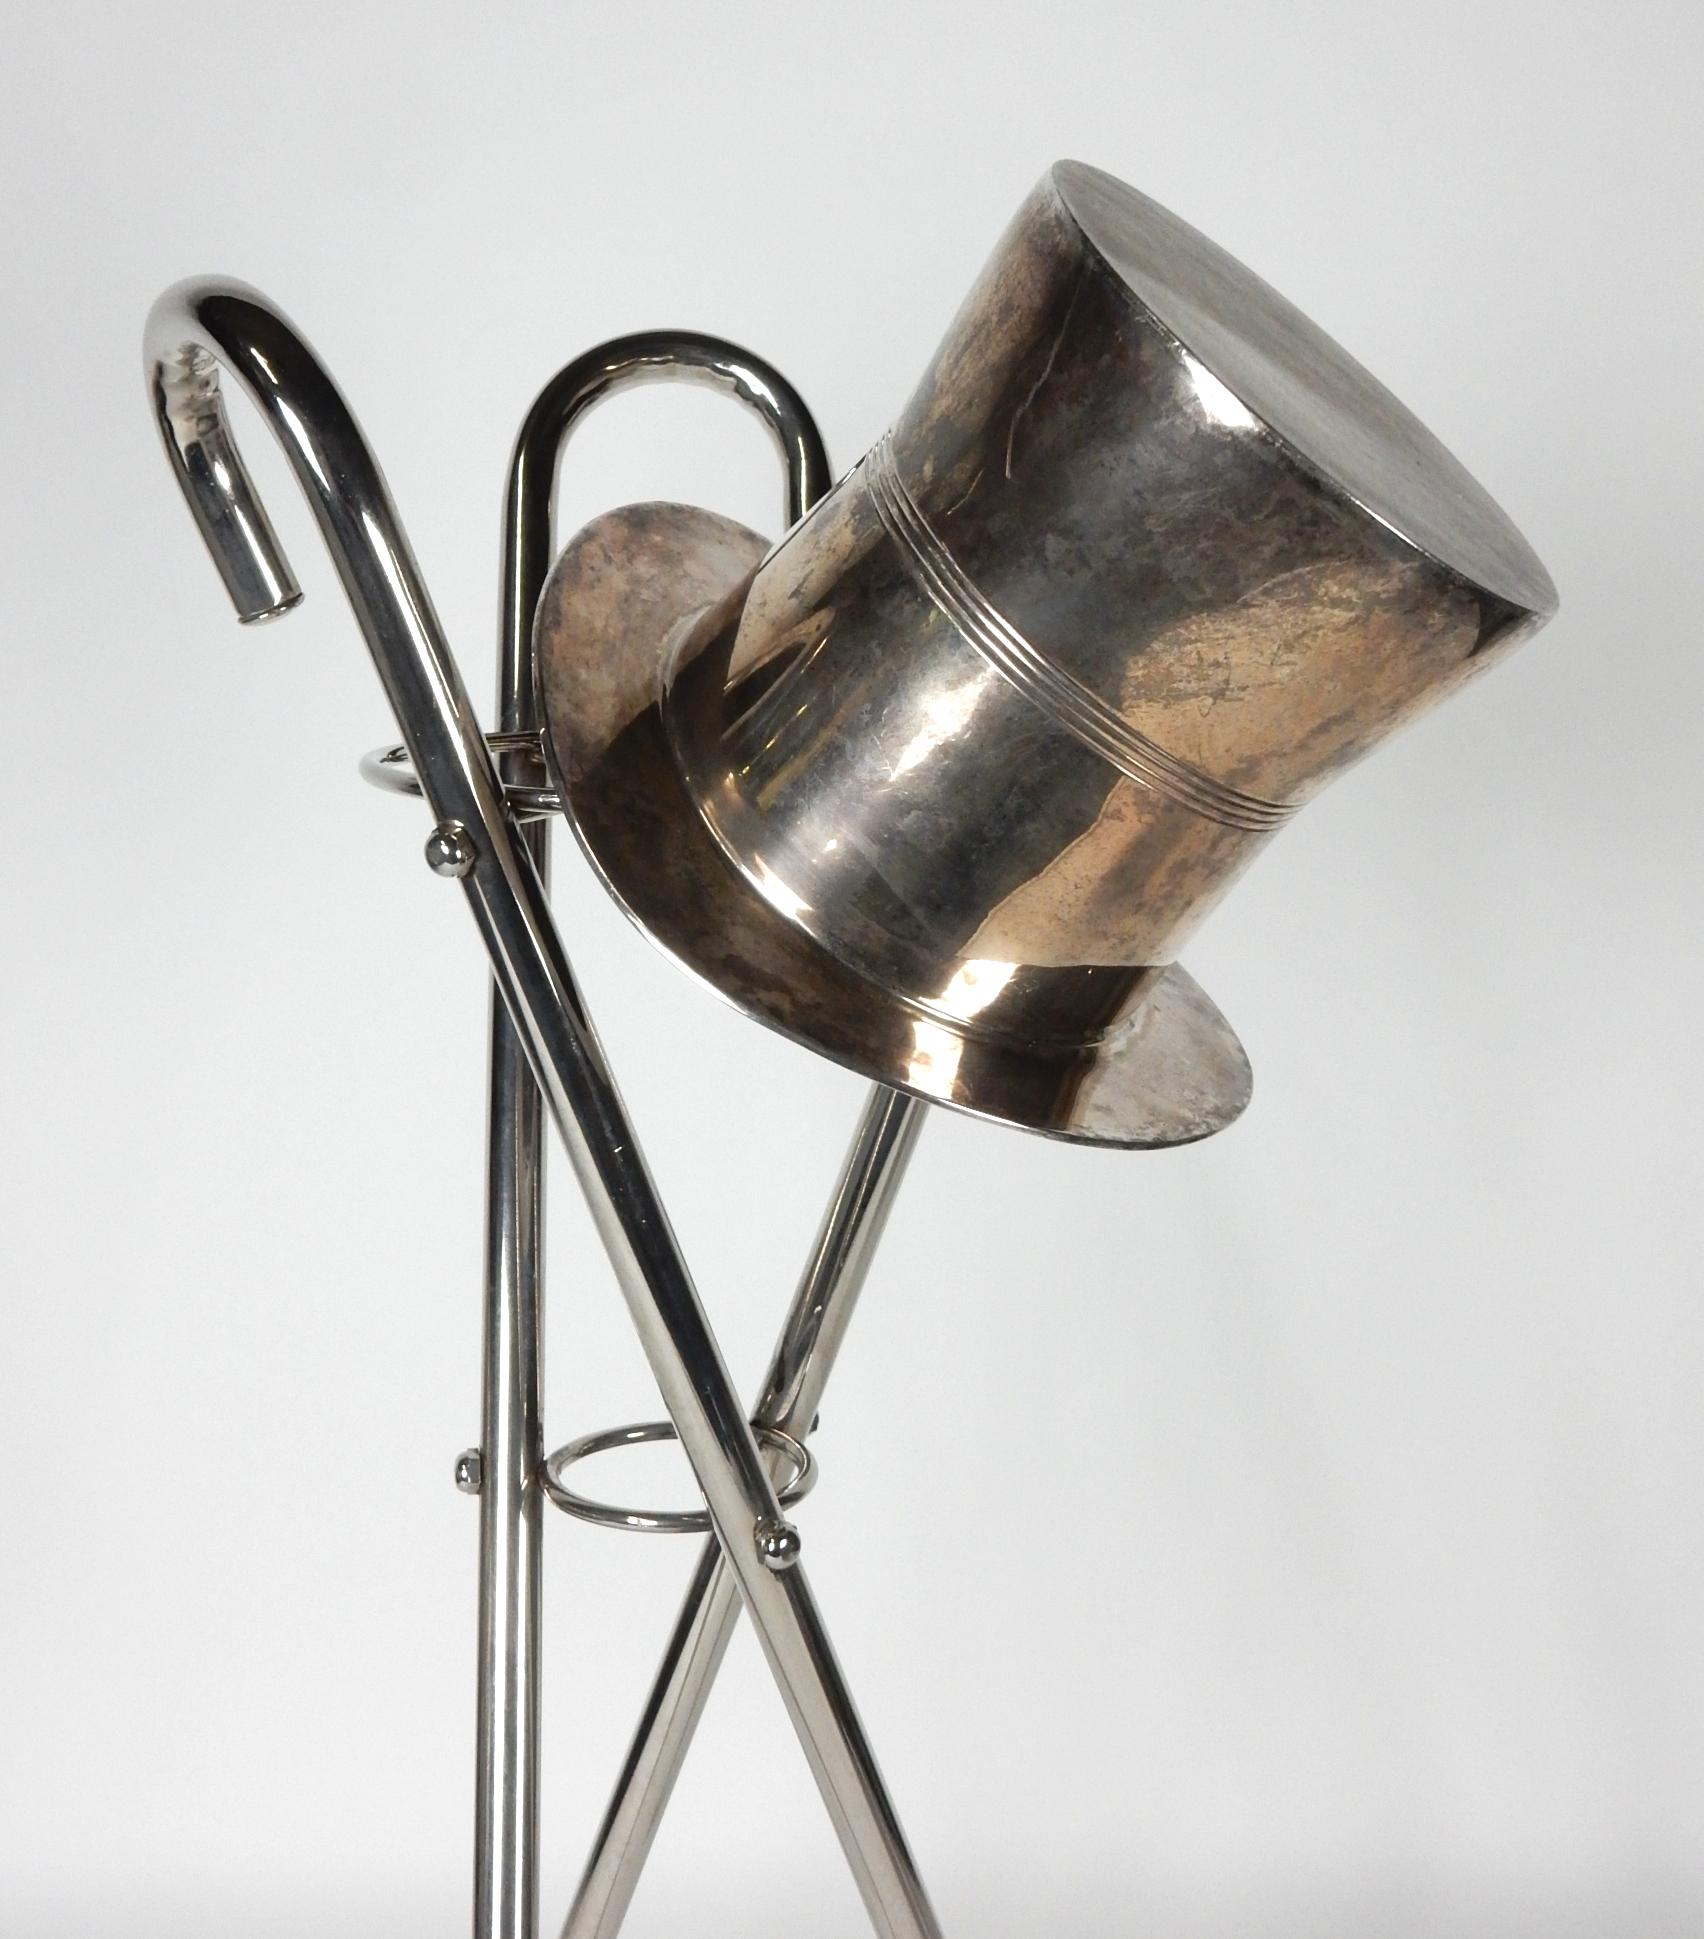 Wonderful vintage 1970's silvered champagne ice bucket shaped like a 
gentlemen's top hat with a tripod walking cane stand.
Bucket formed of solid brass with silverplate.
Cane stand is chrome plated steel.
This set shows nice aged patina from